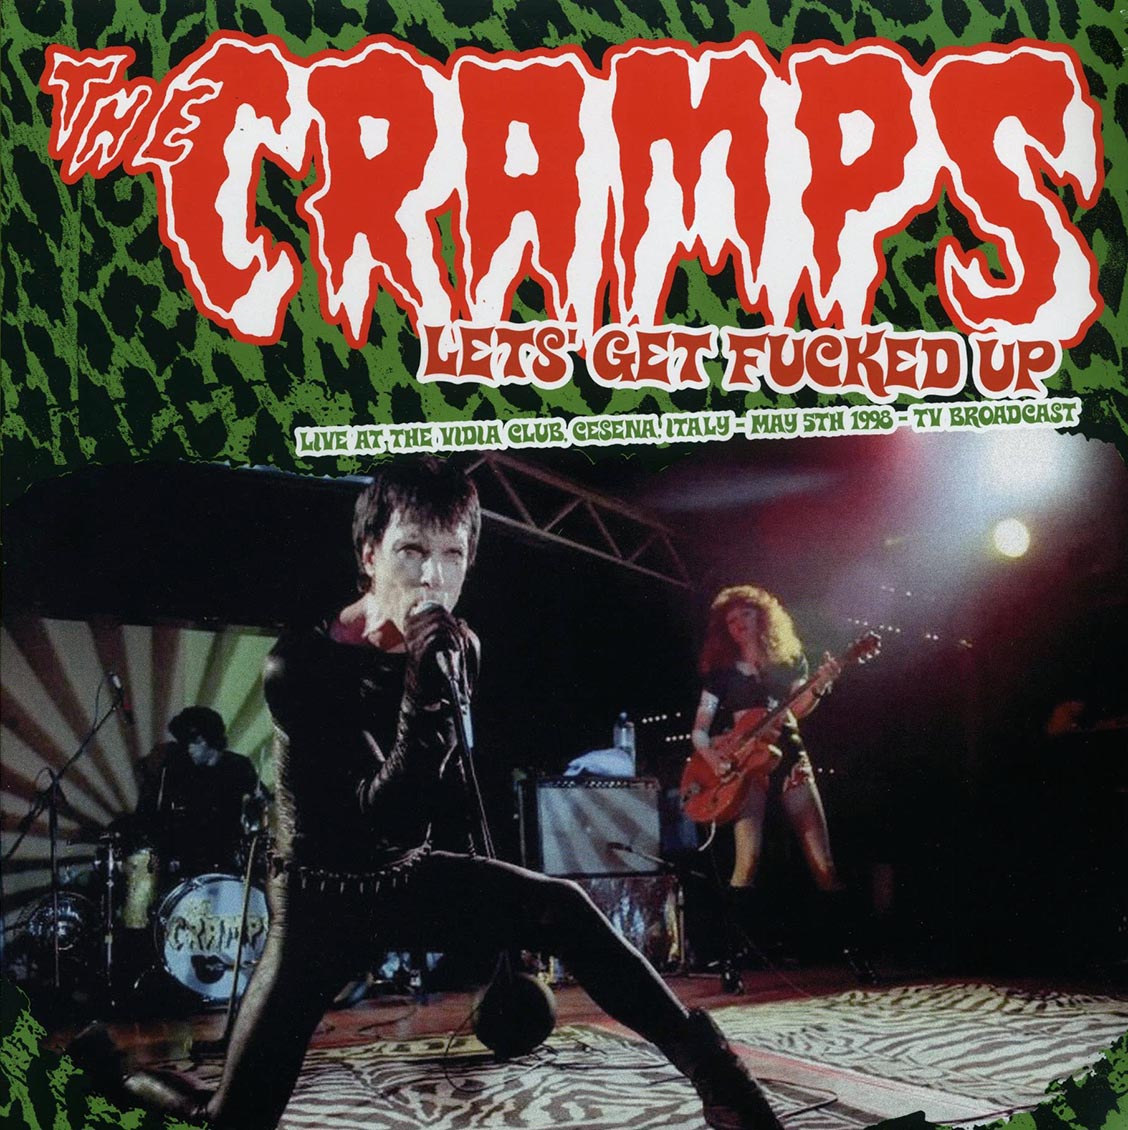 The Cramps - Let's Get F----- Up: Live At The Vidia Club, Cesena, Italy May 5th 1989 TV Broadcast (ltd. 500 copies made) (2xLP) - Vinyl LP